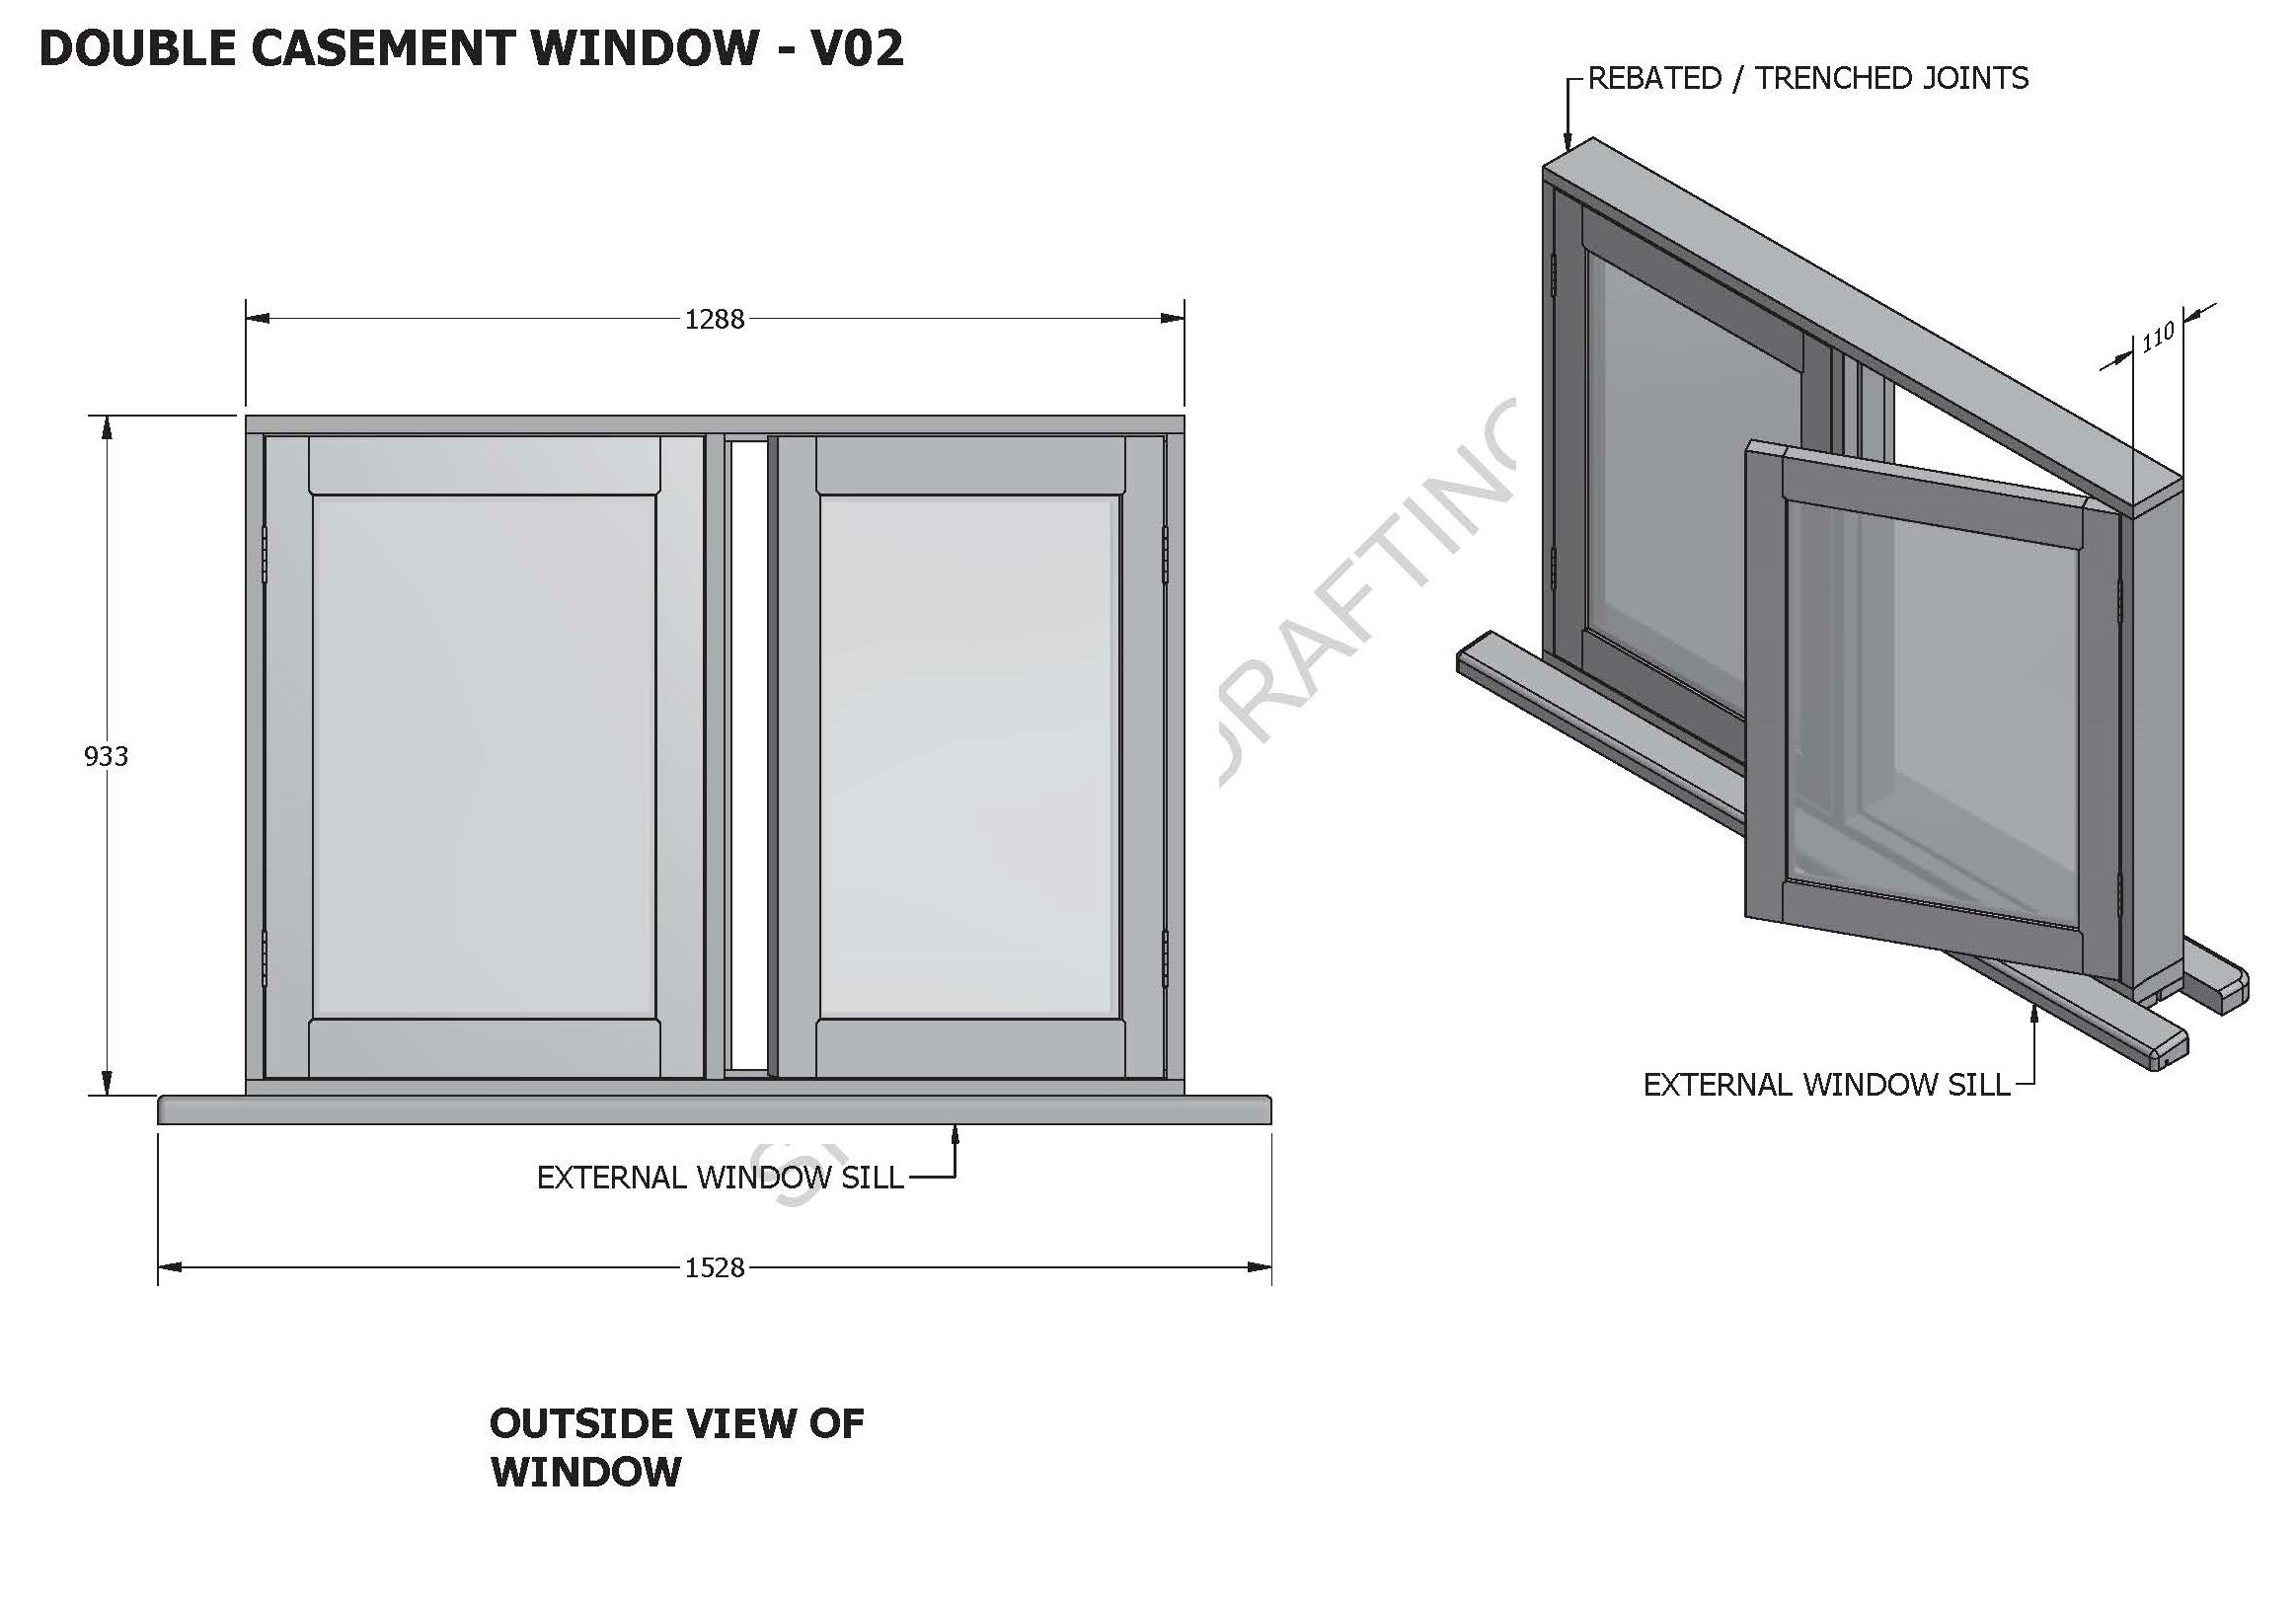 DOUBLE CASEMENT WINDOWS V02 - Build your own and SAVE BIG $$$